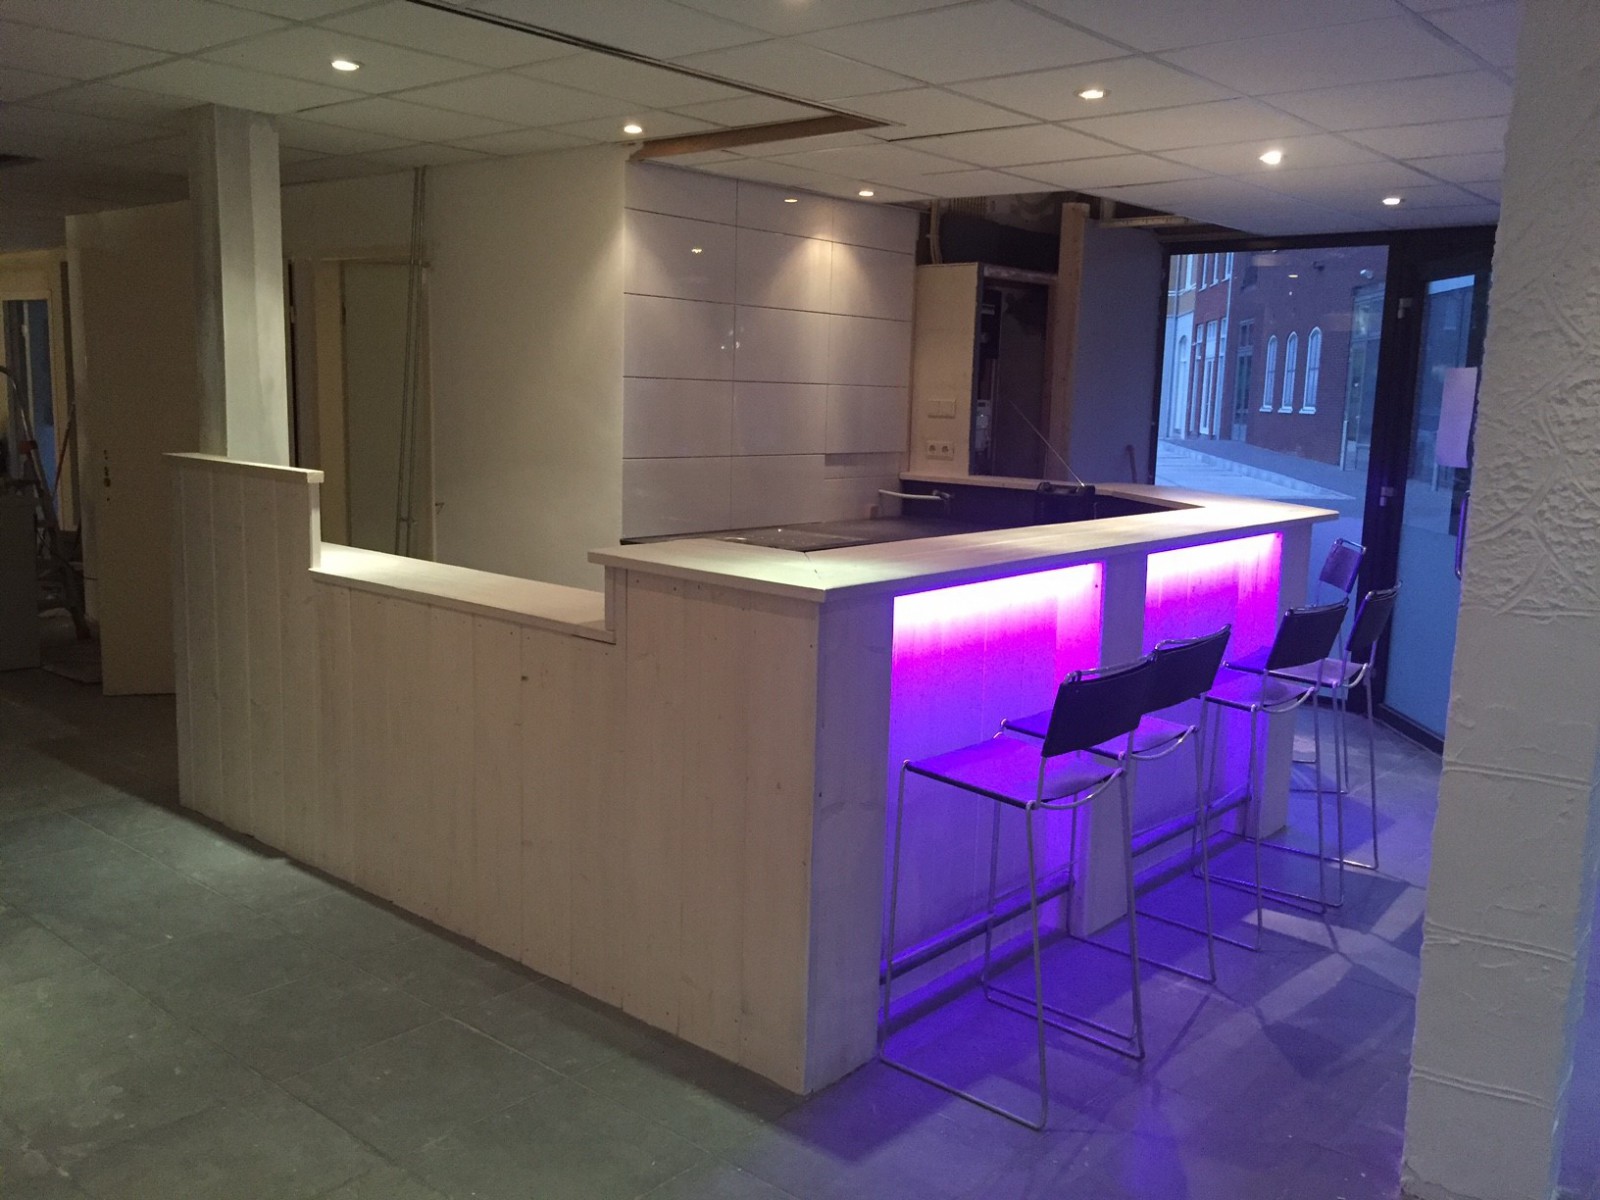 Tanning & Beauty Lounge Duiven opent nieuw pand